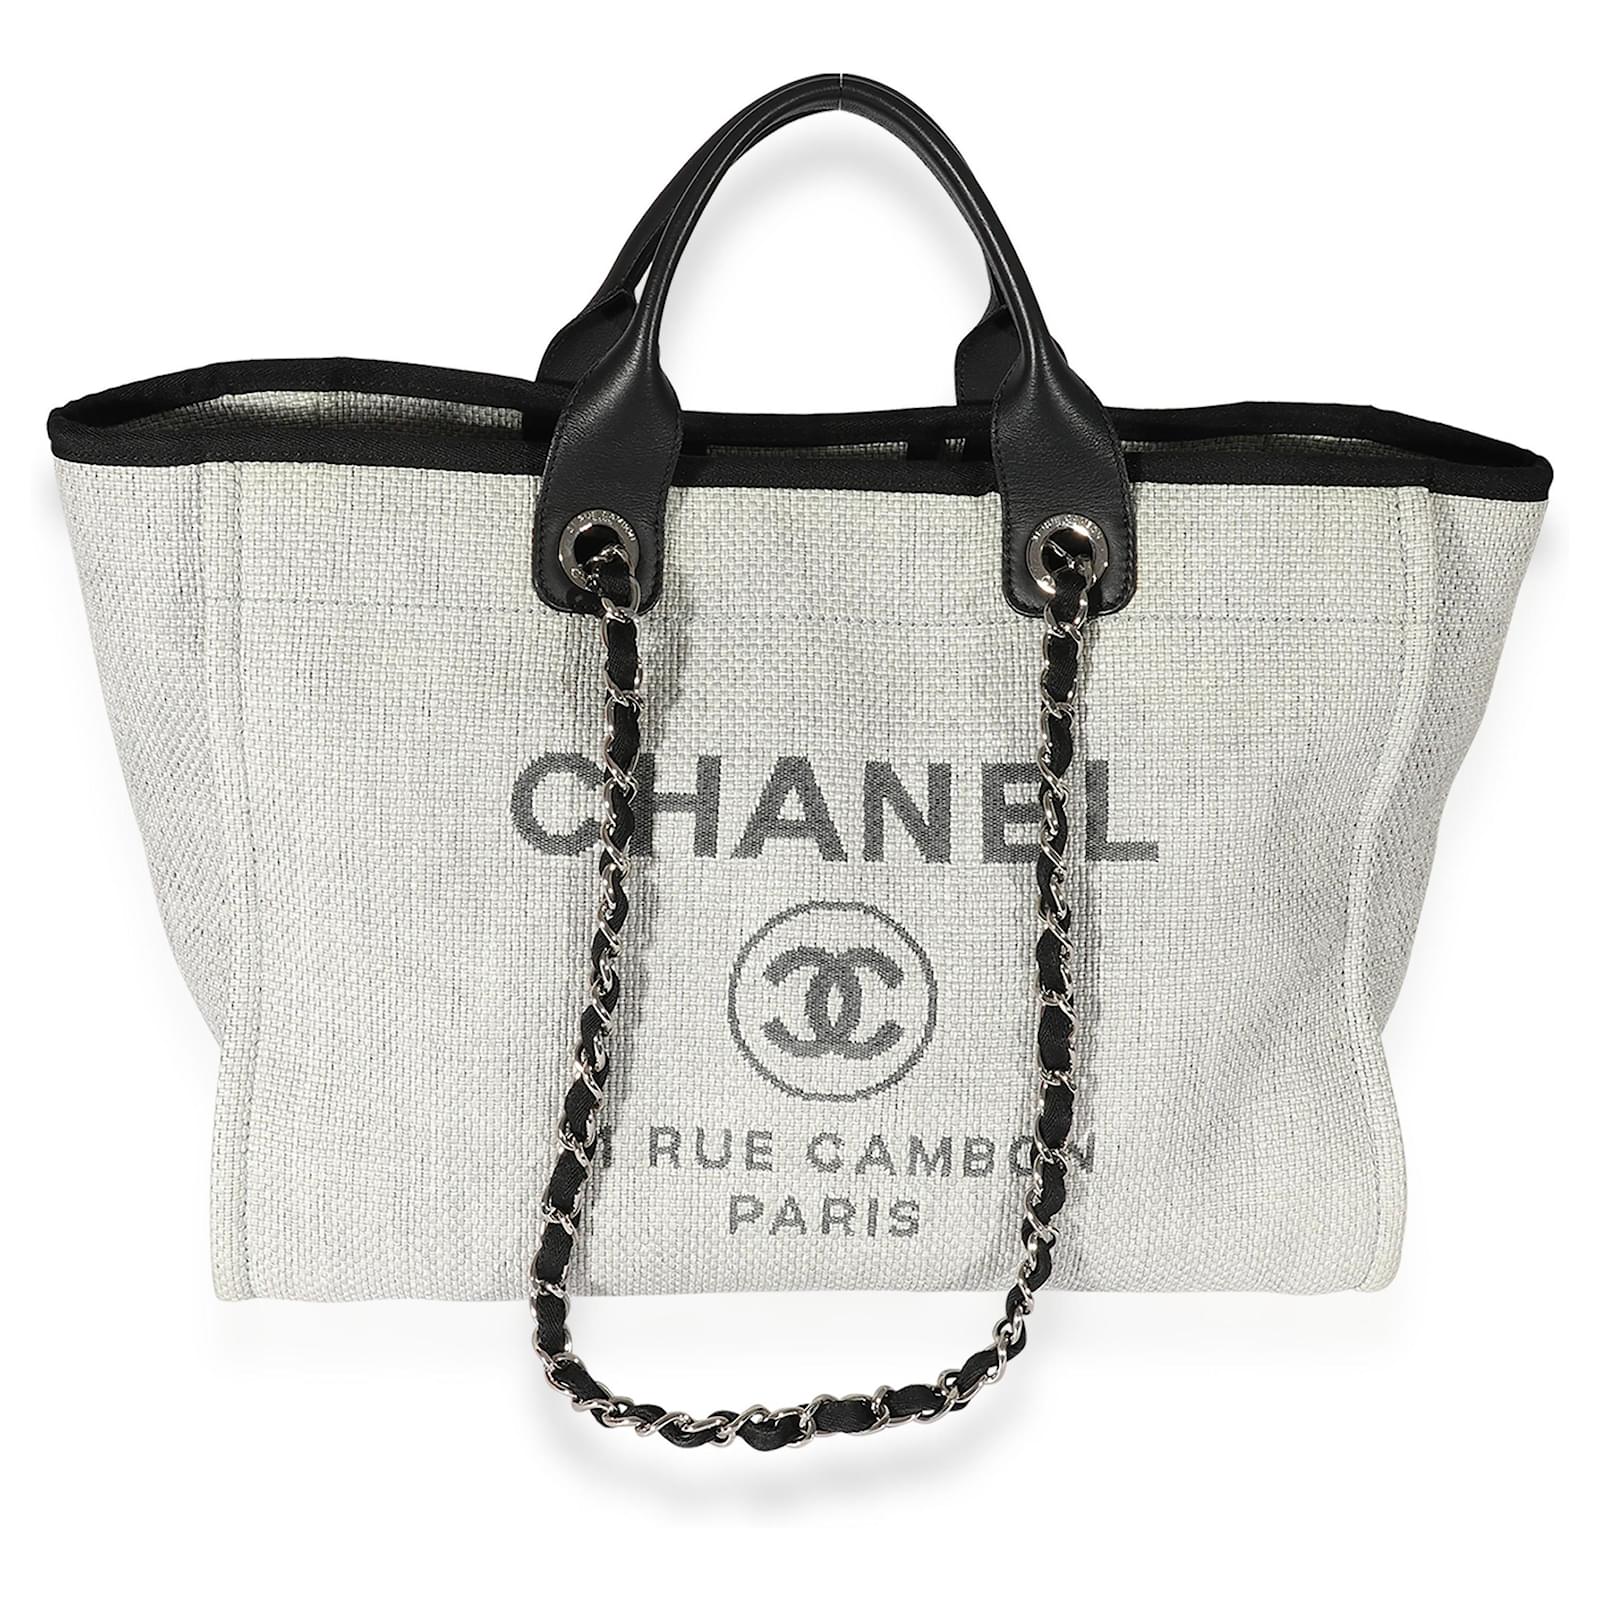 grey chanel deauville tote large